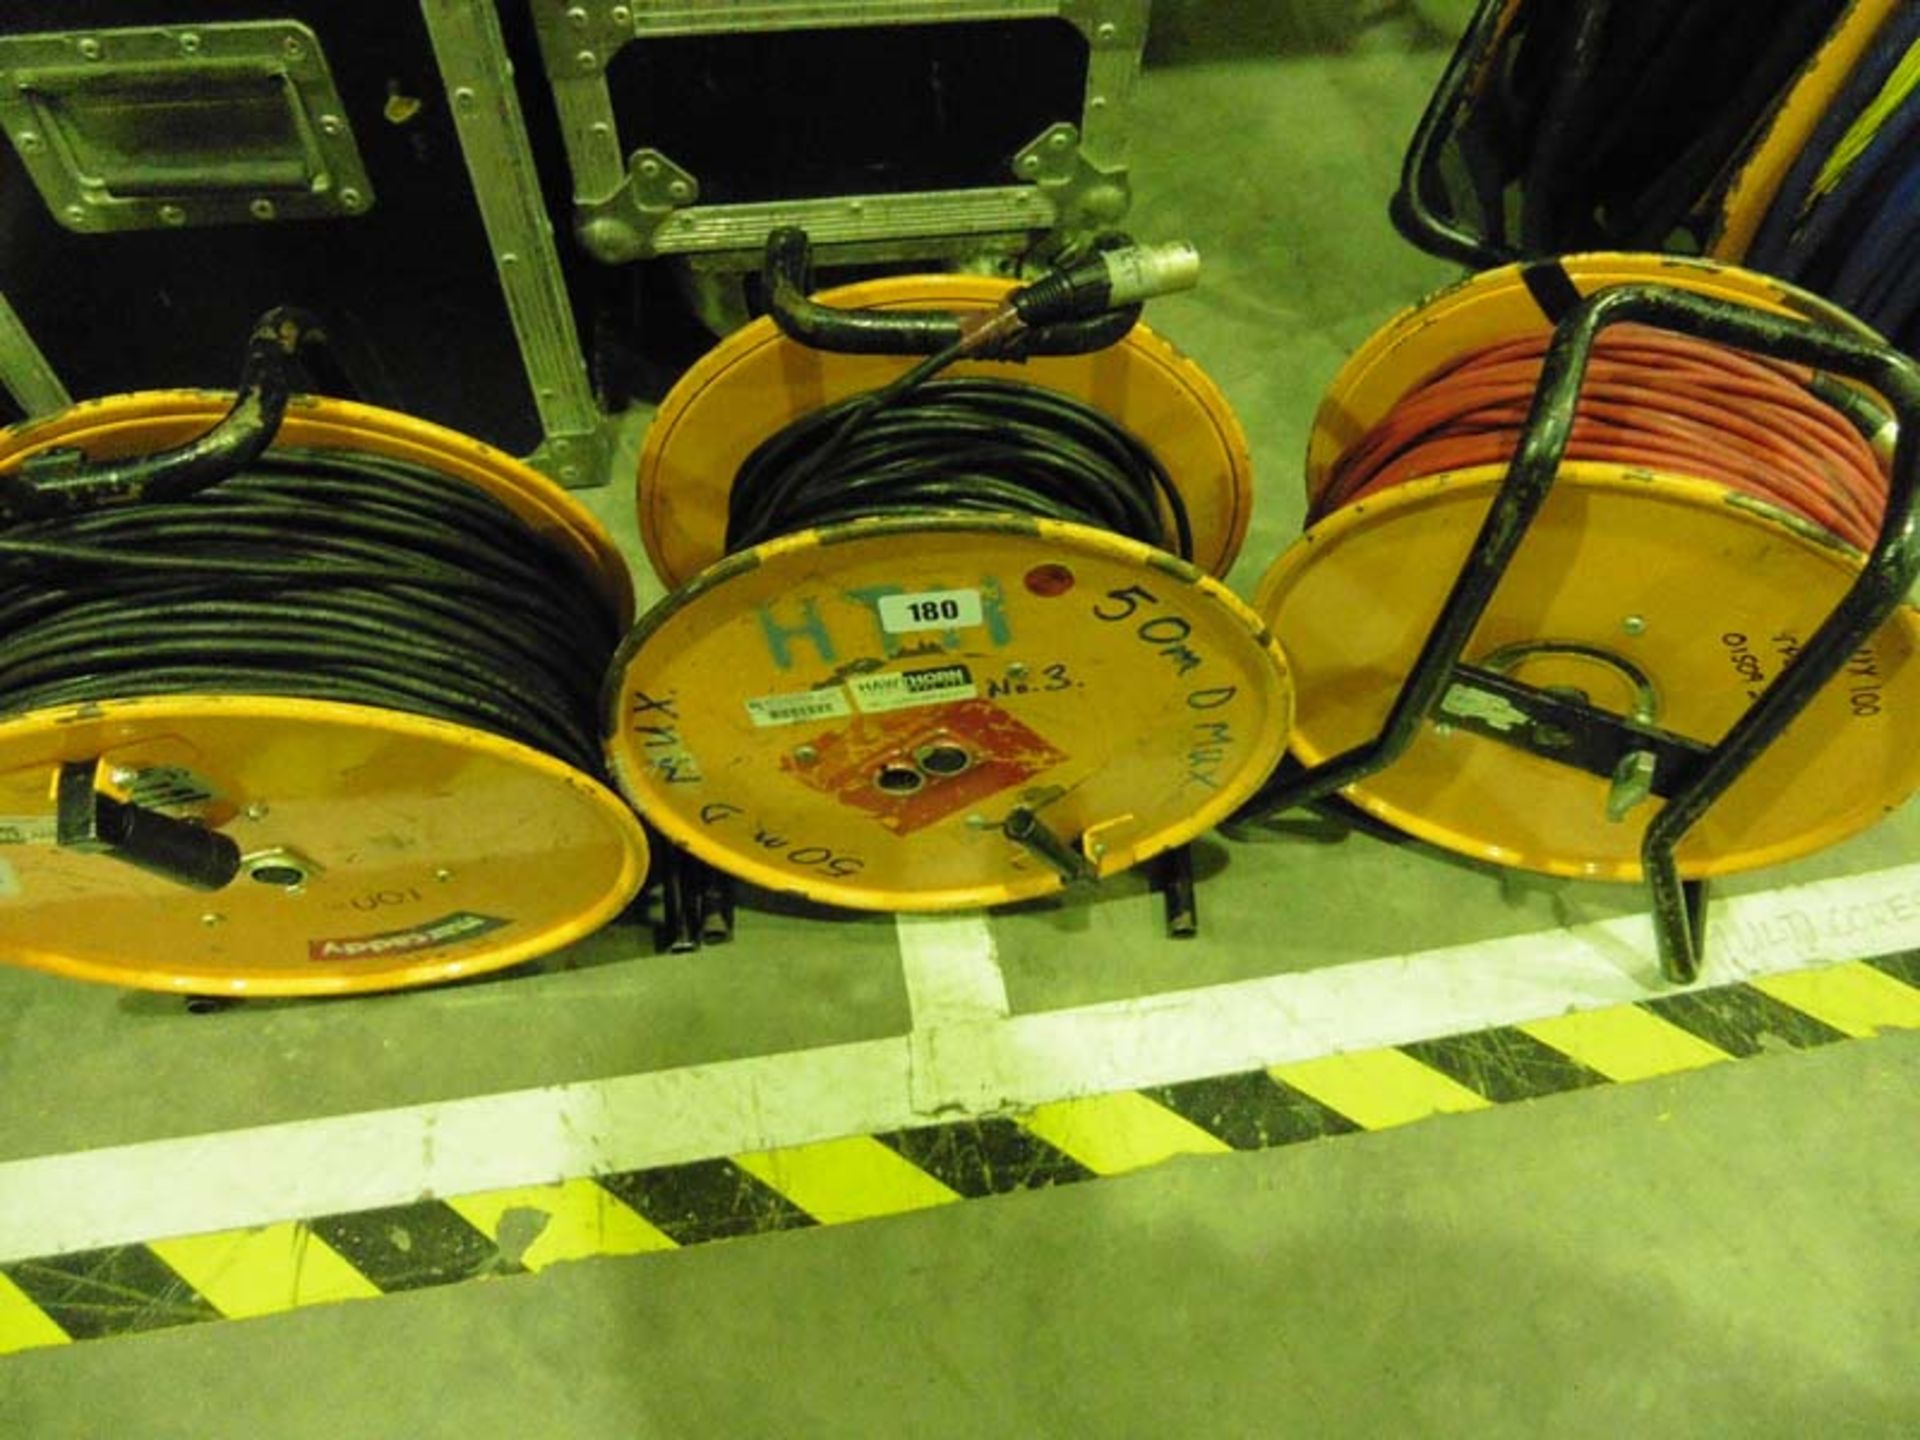 3 5pin XLR DMox 50 metre cables on reels - Image 2 of 2